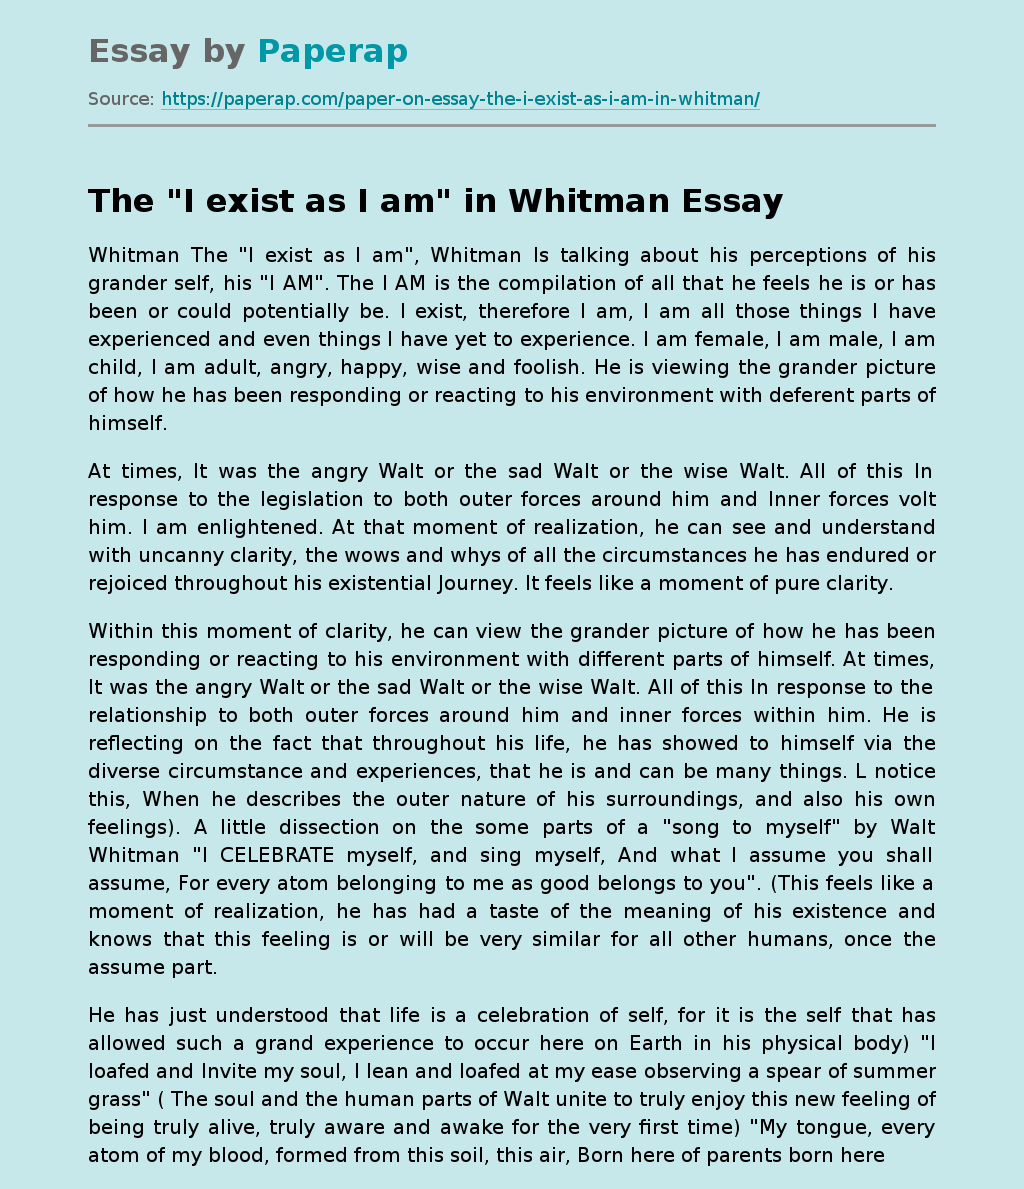 "The I Exist as I Am” by Whitman